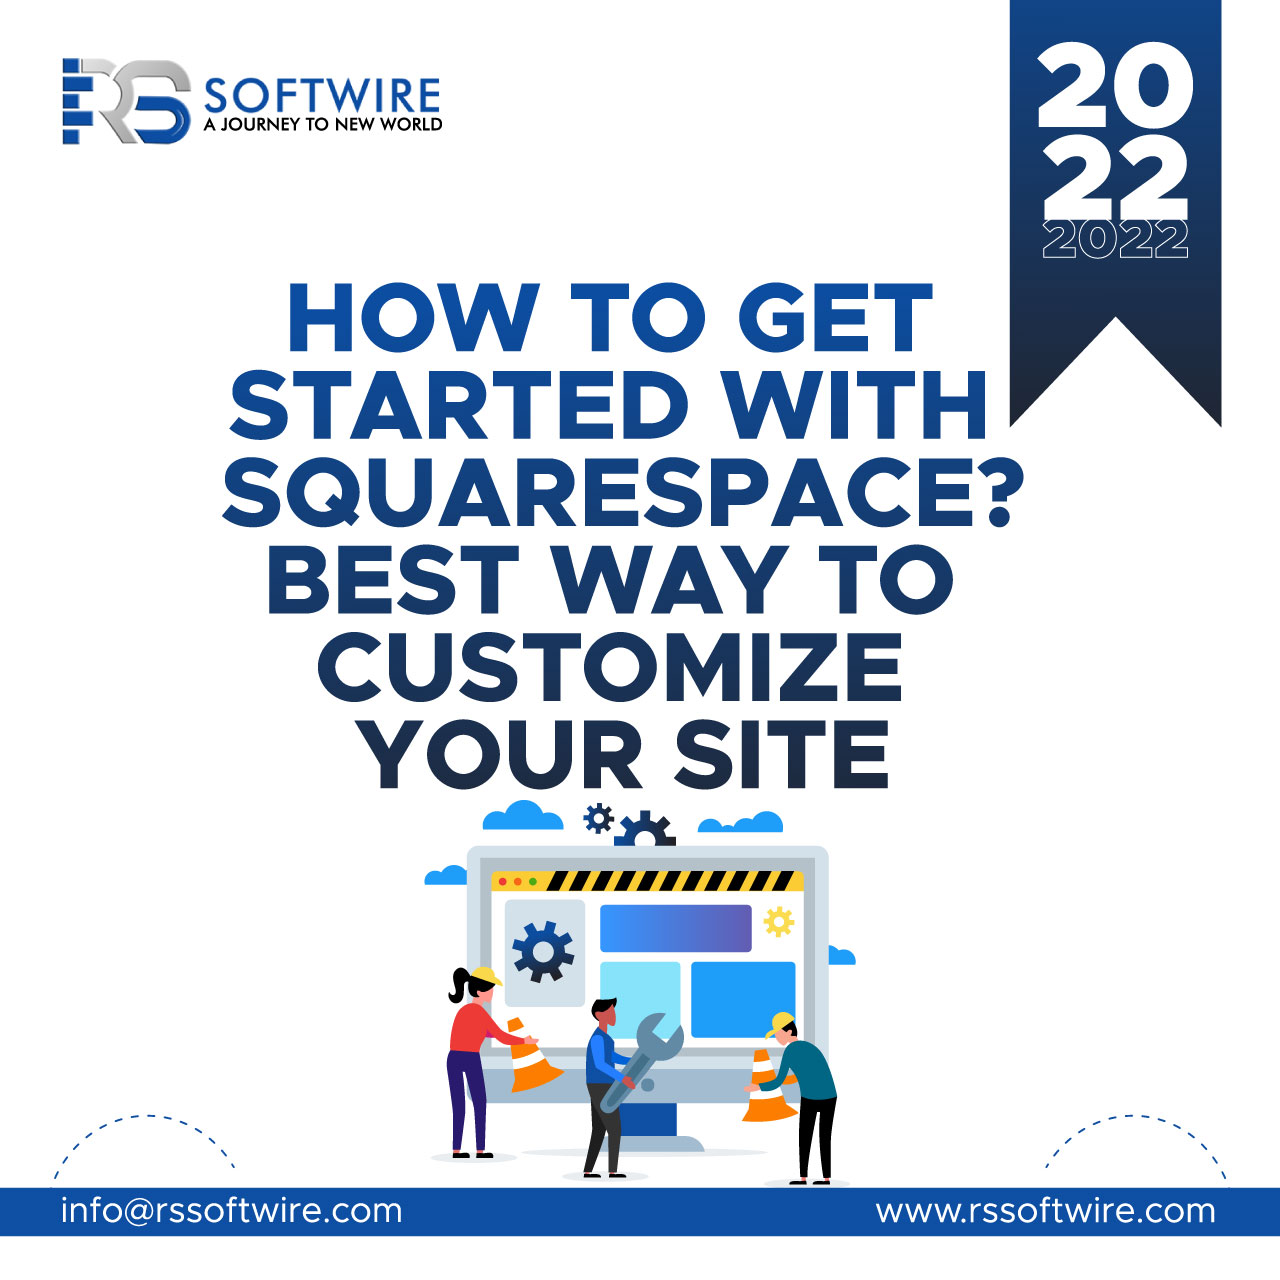 How to Get Started With Squarespace